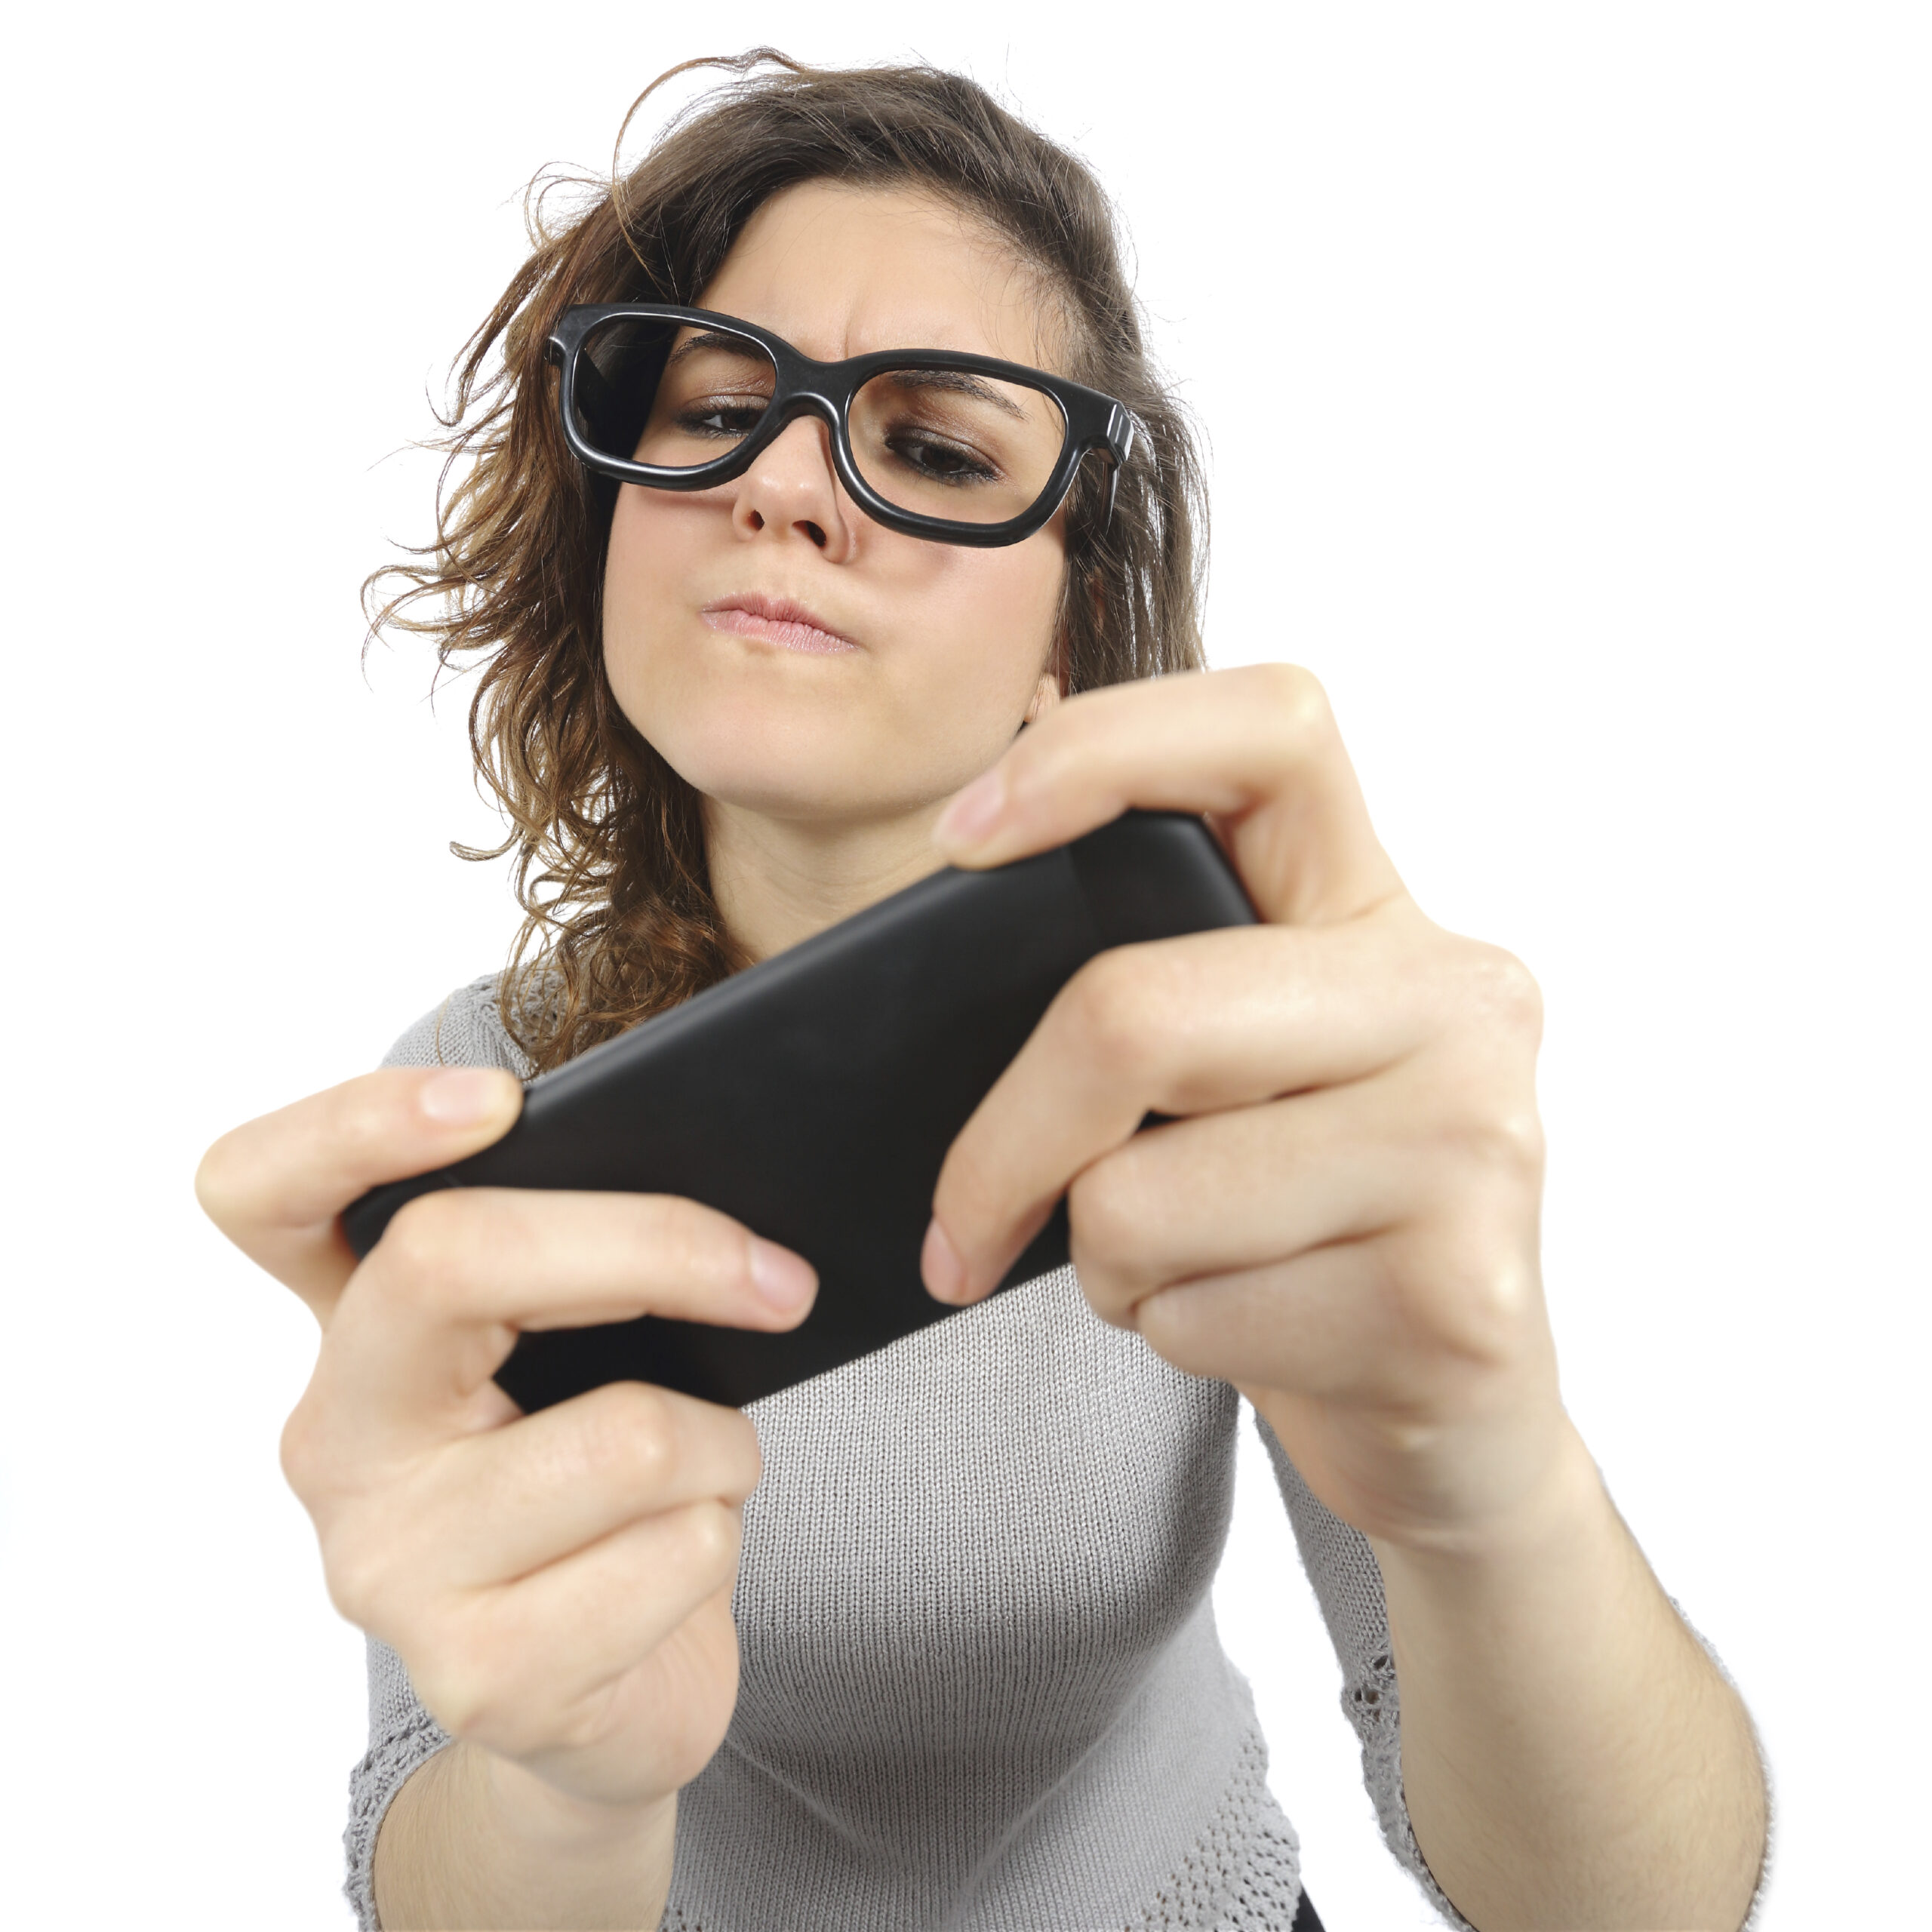 Geek woman playing with a smart phone isolated on a white background